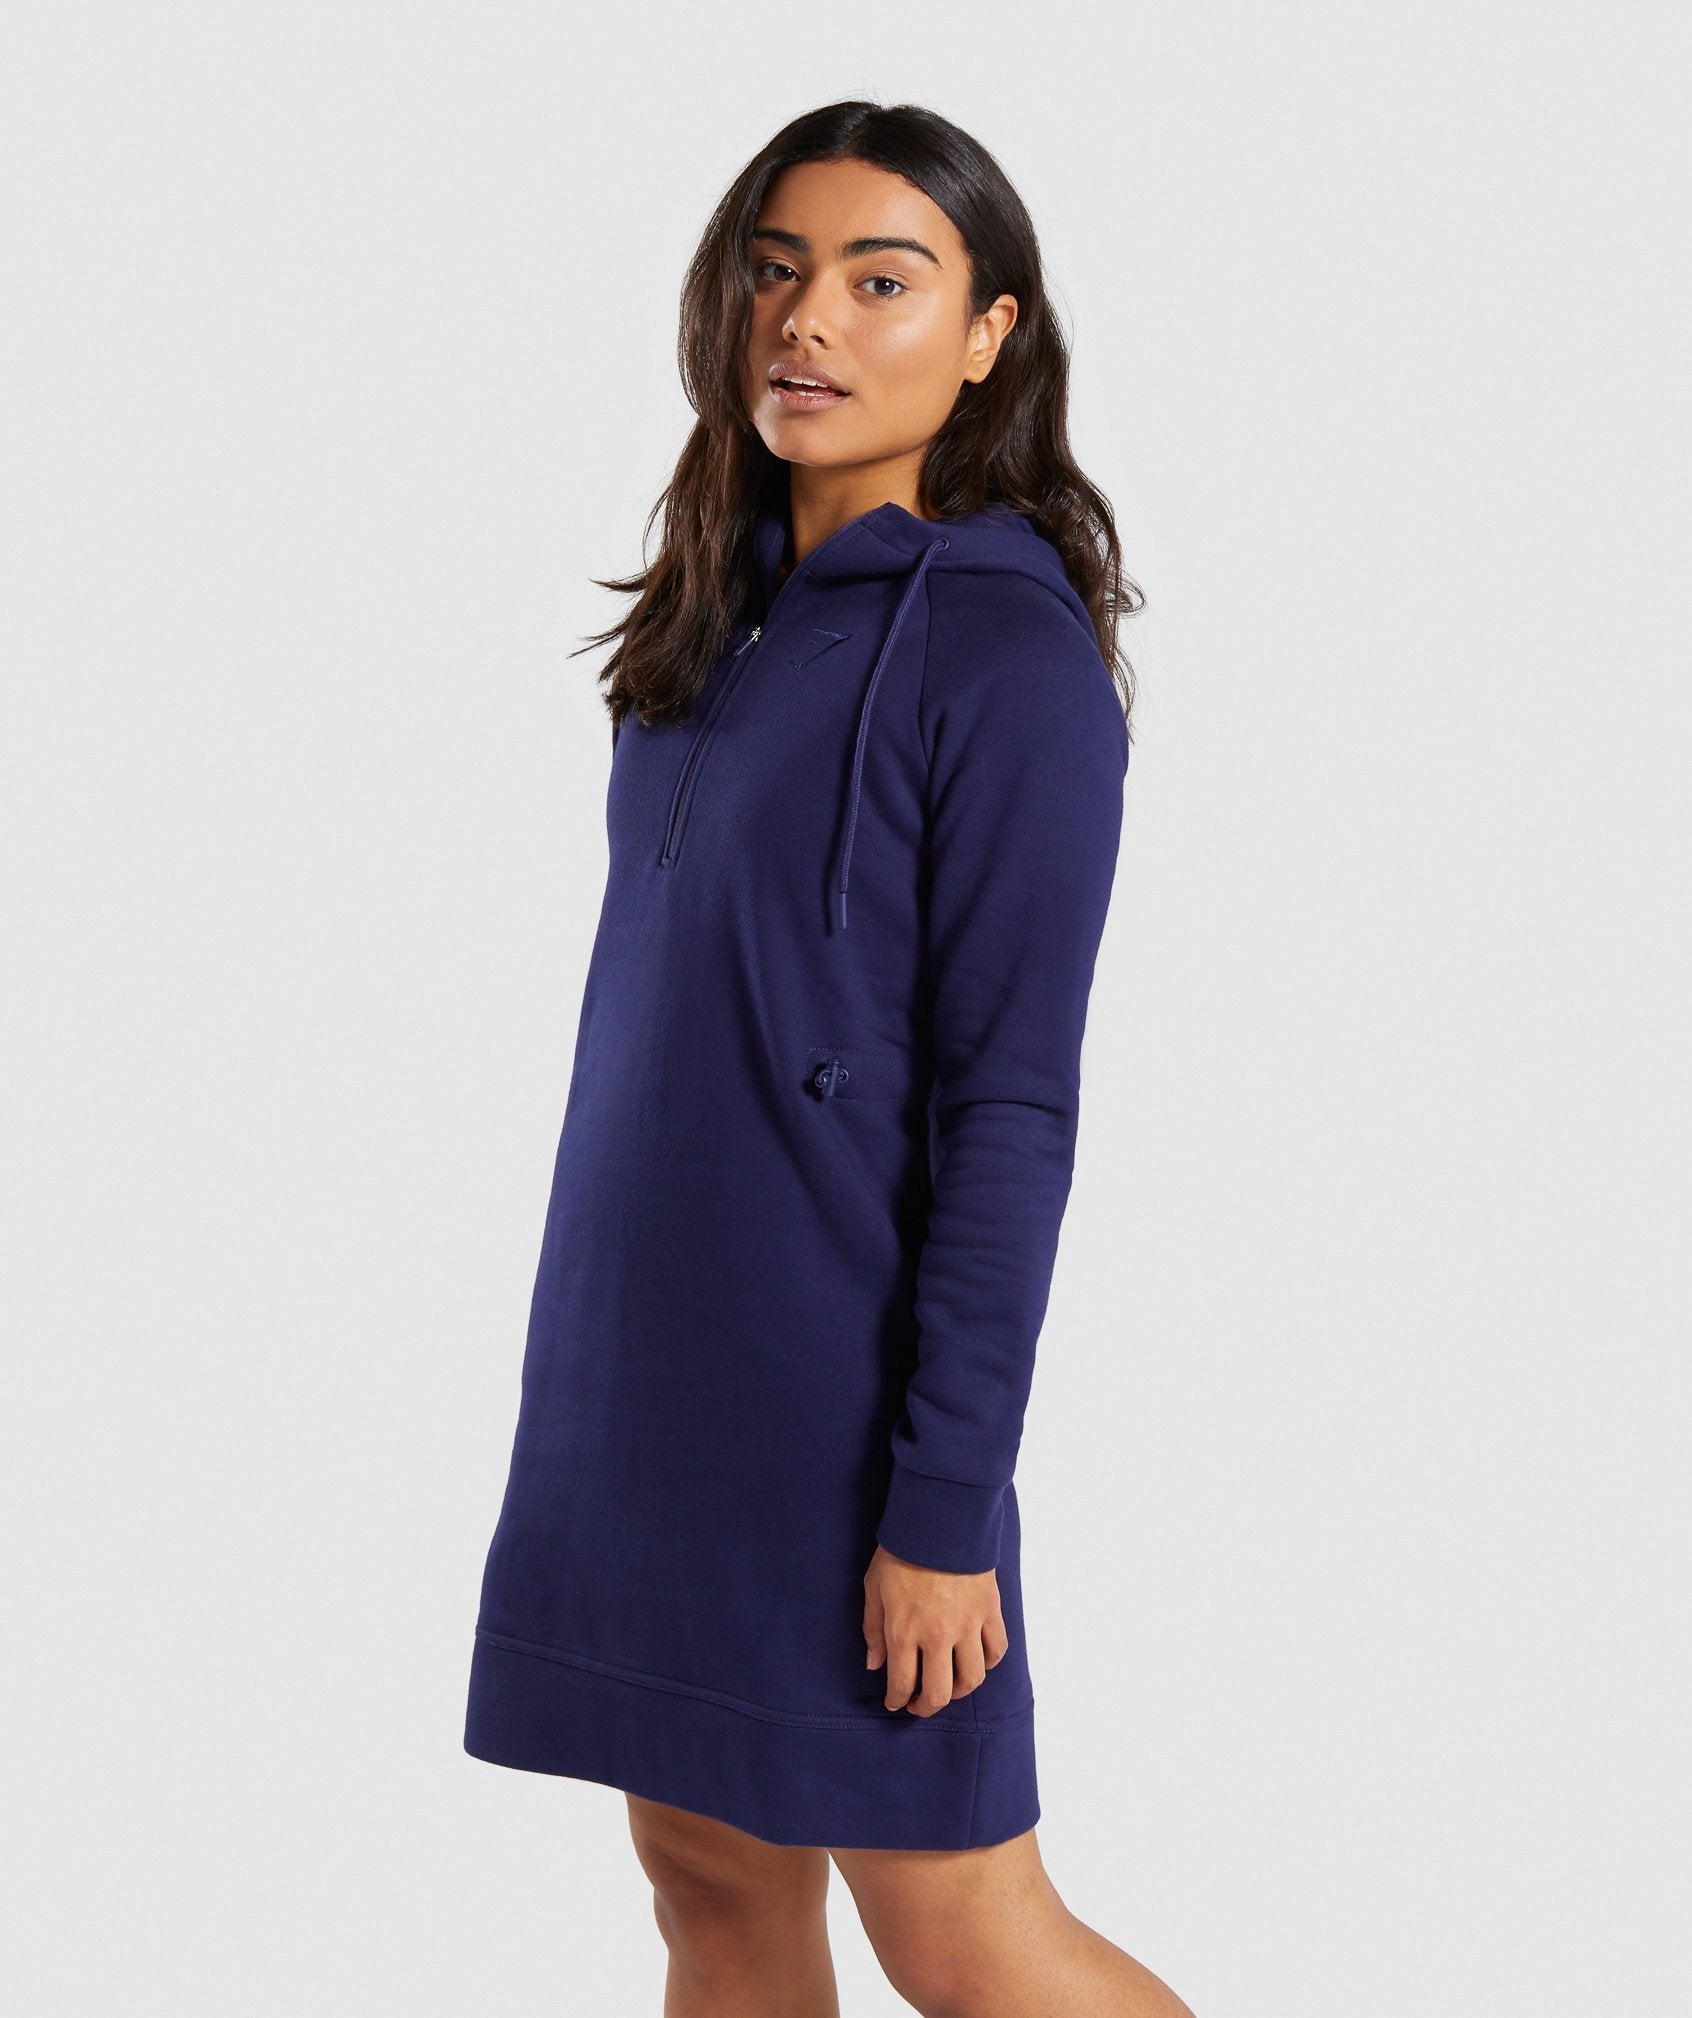 Slim Fit Hooded Dress in Evening Navy Blue - view 3